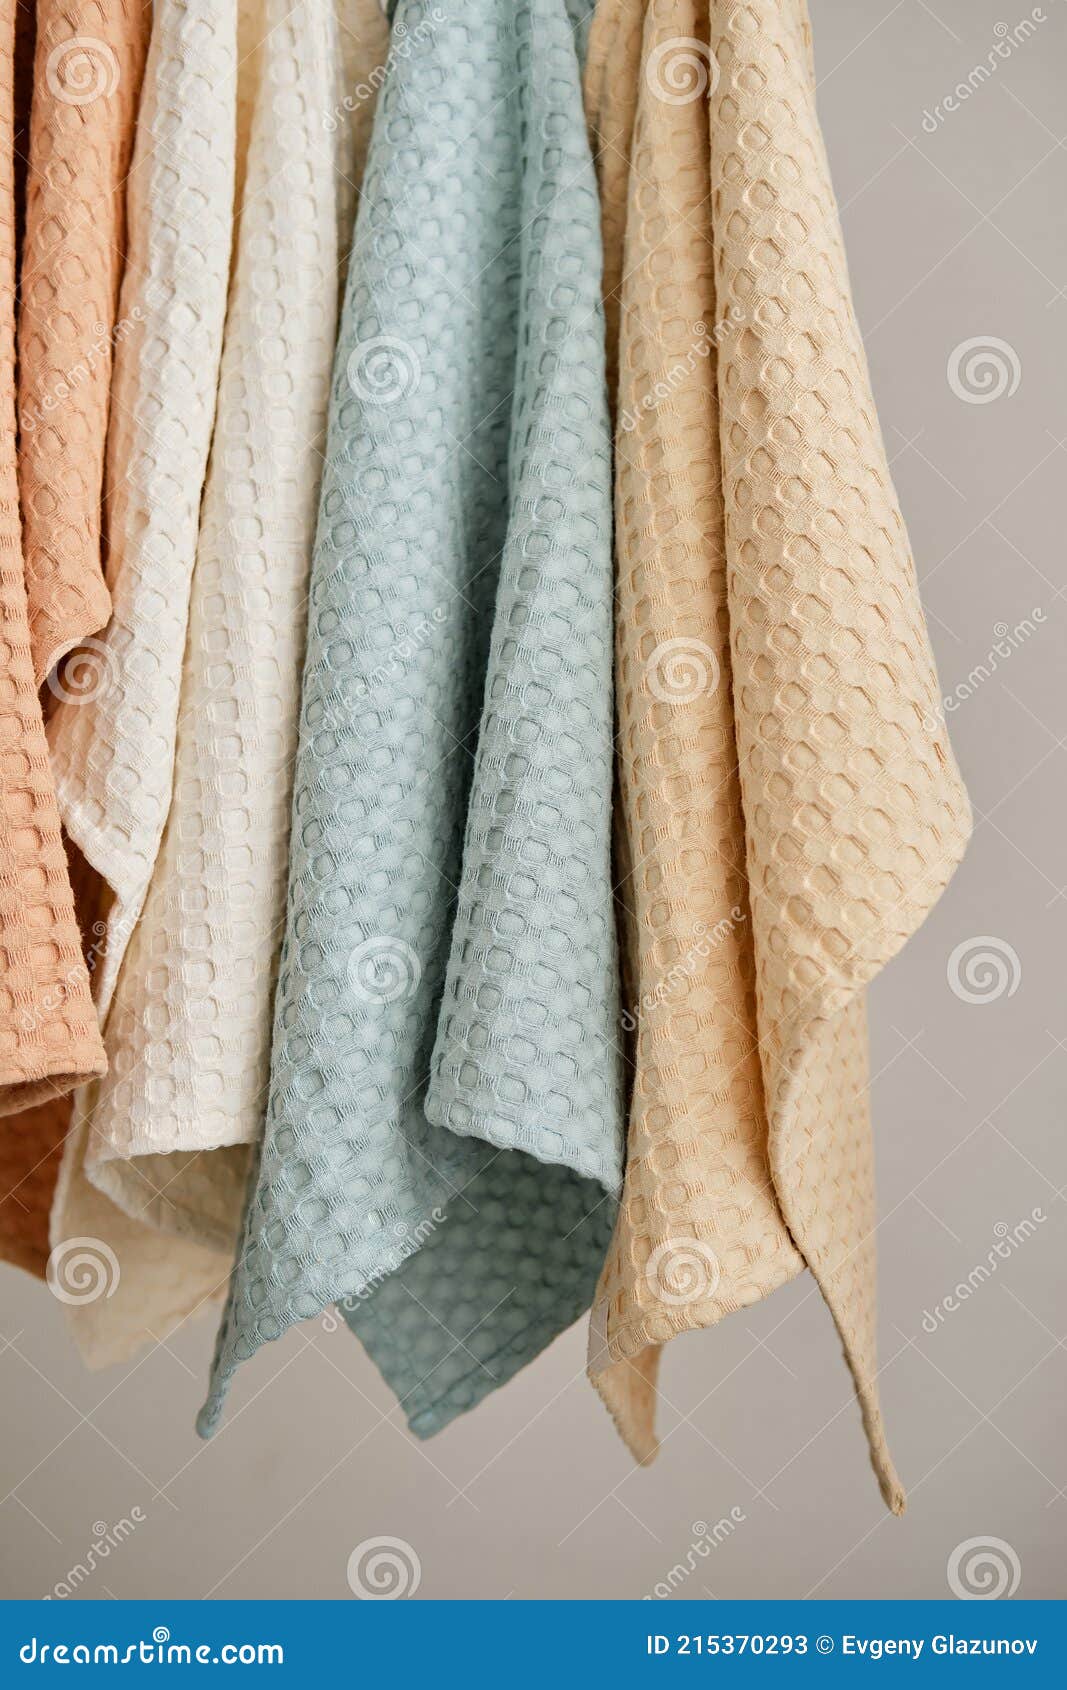 https://thumbs.dreamstime.com/z/collection-natural-muslin-kitchen-towels-hung-row-unusual-wooden-hanger-natural-soft-airy-collection-215370293.jpg